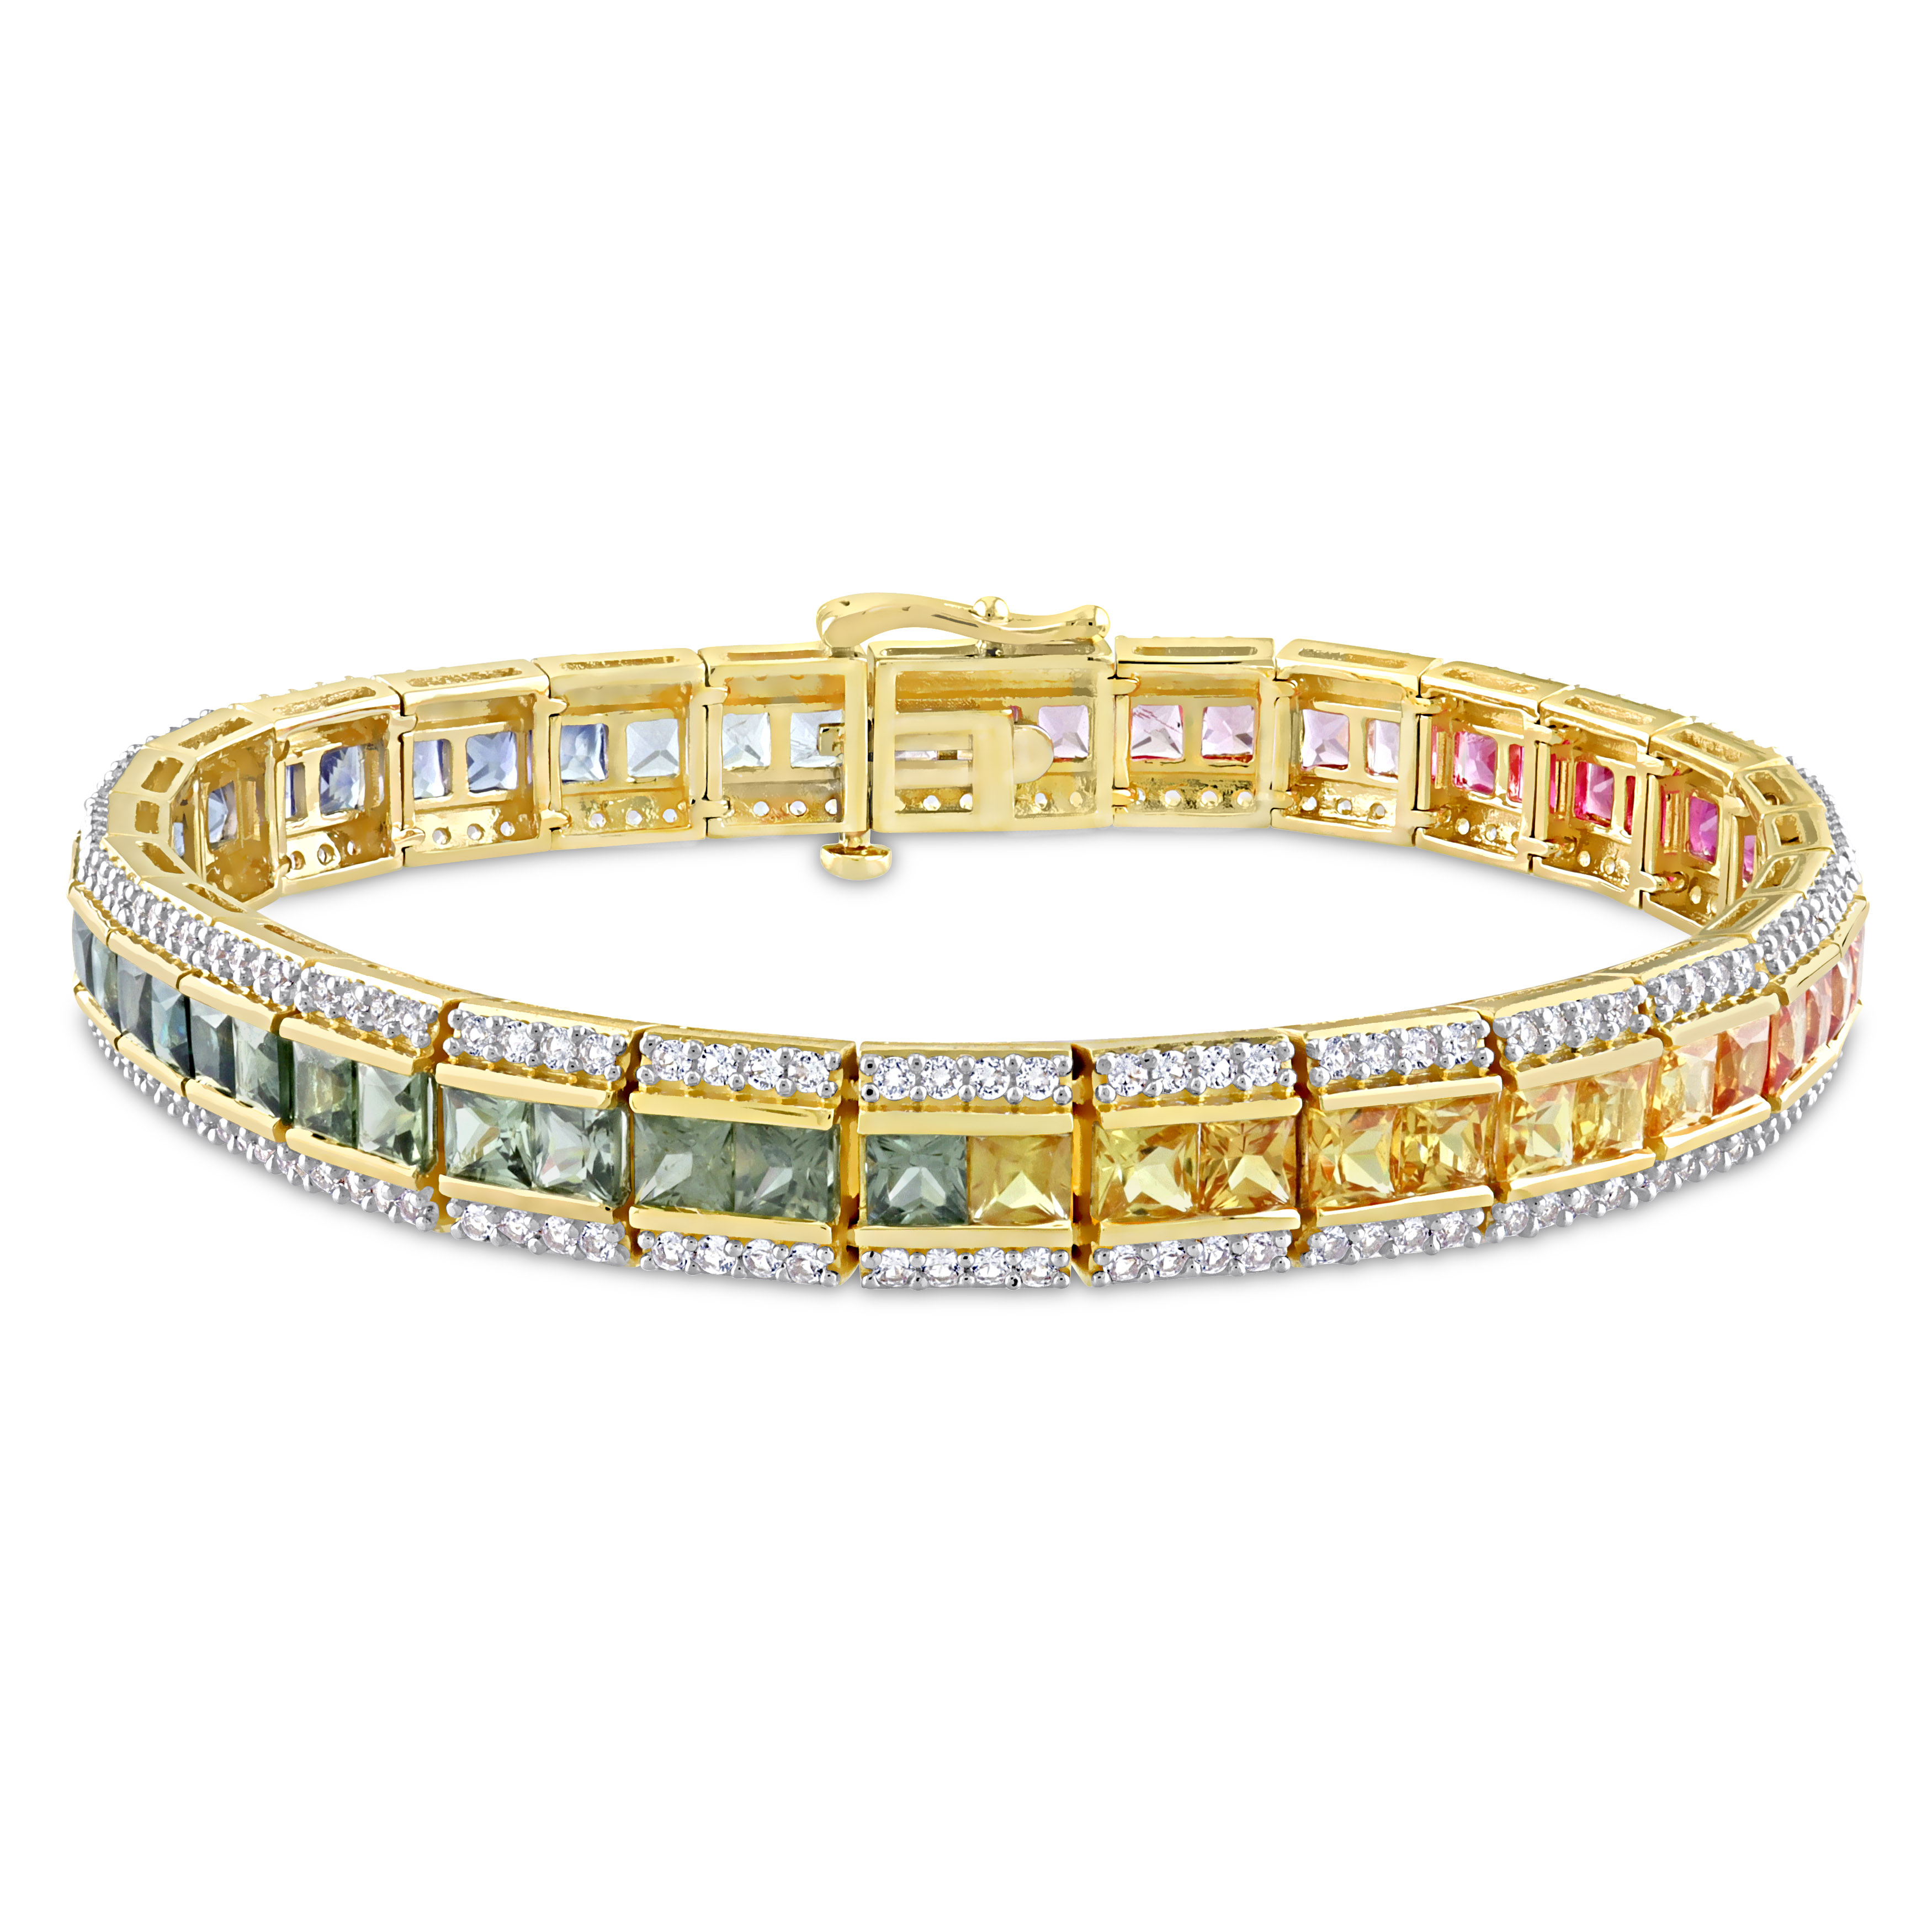 15 3/8 CT TGW Multi-Color Square and Round Sapphire Tennis Bracelet in 14k Yellow Gold - 7 in.